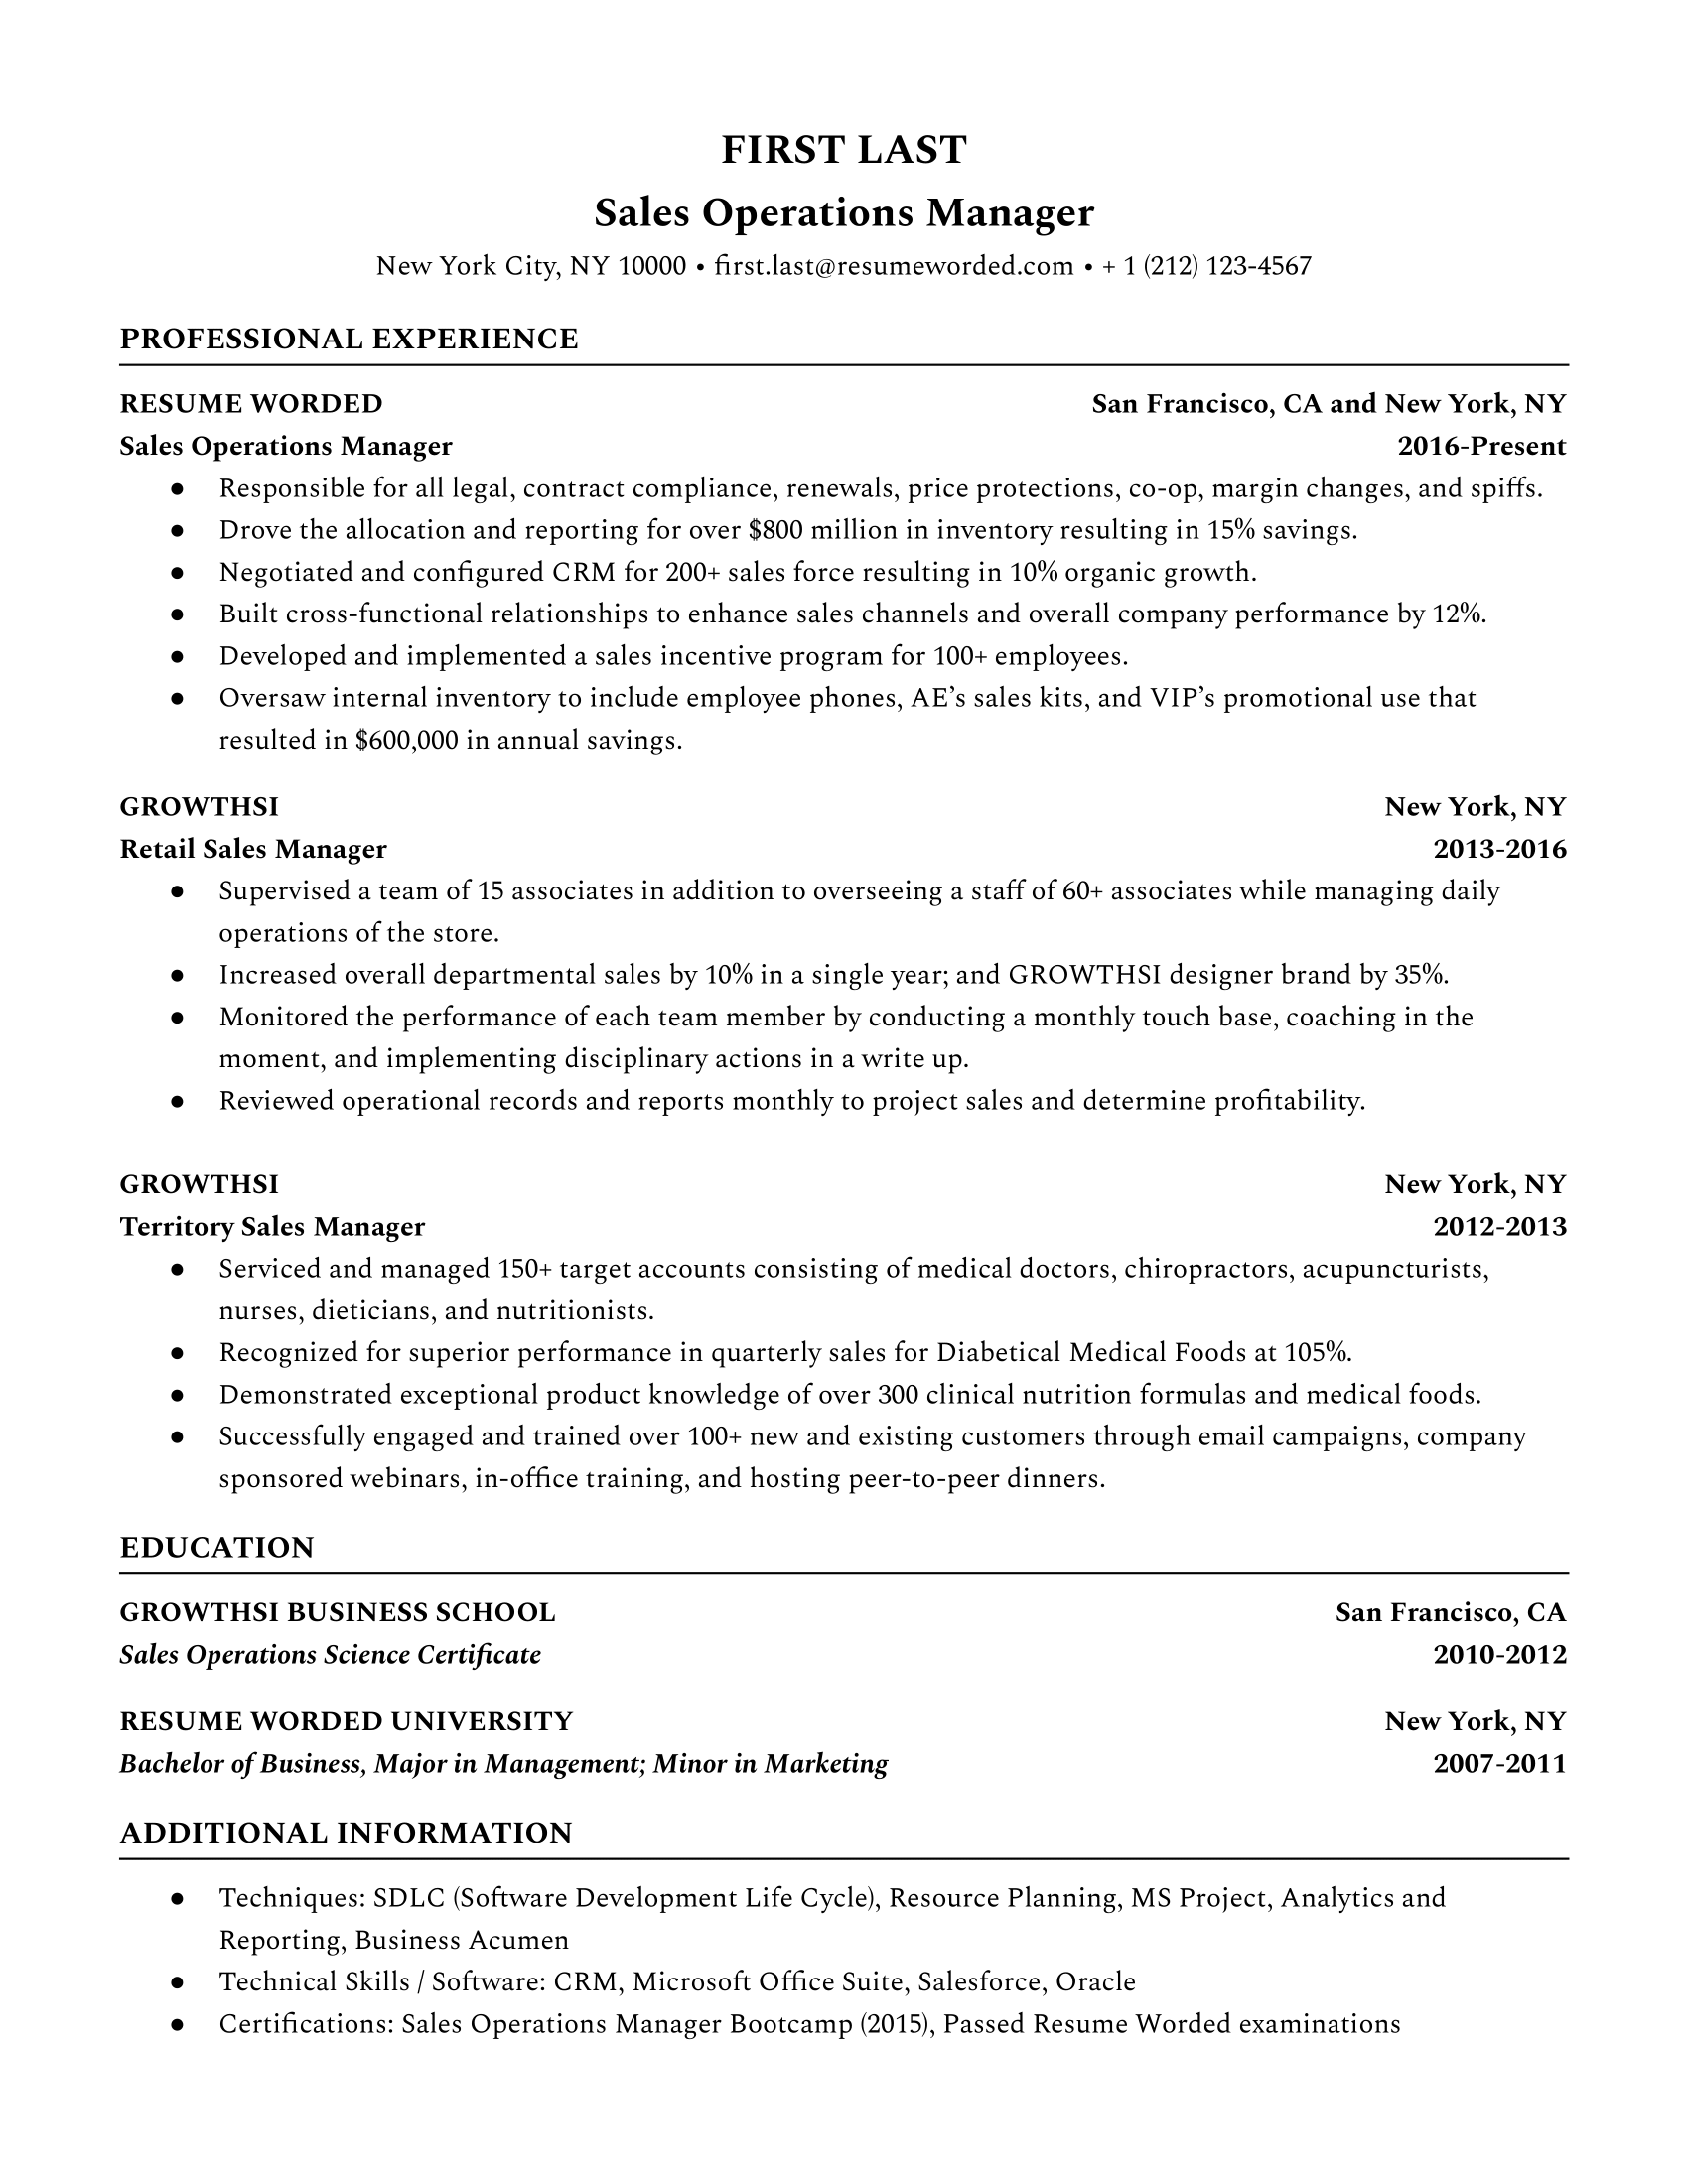 Sales operations manager resume with sales background, management experience, and performance metrics